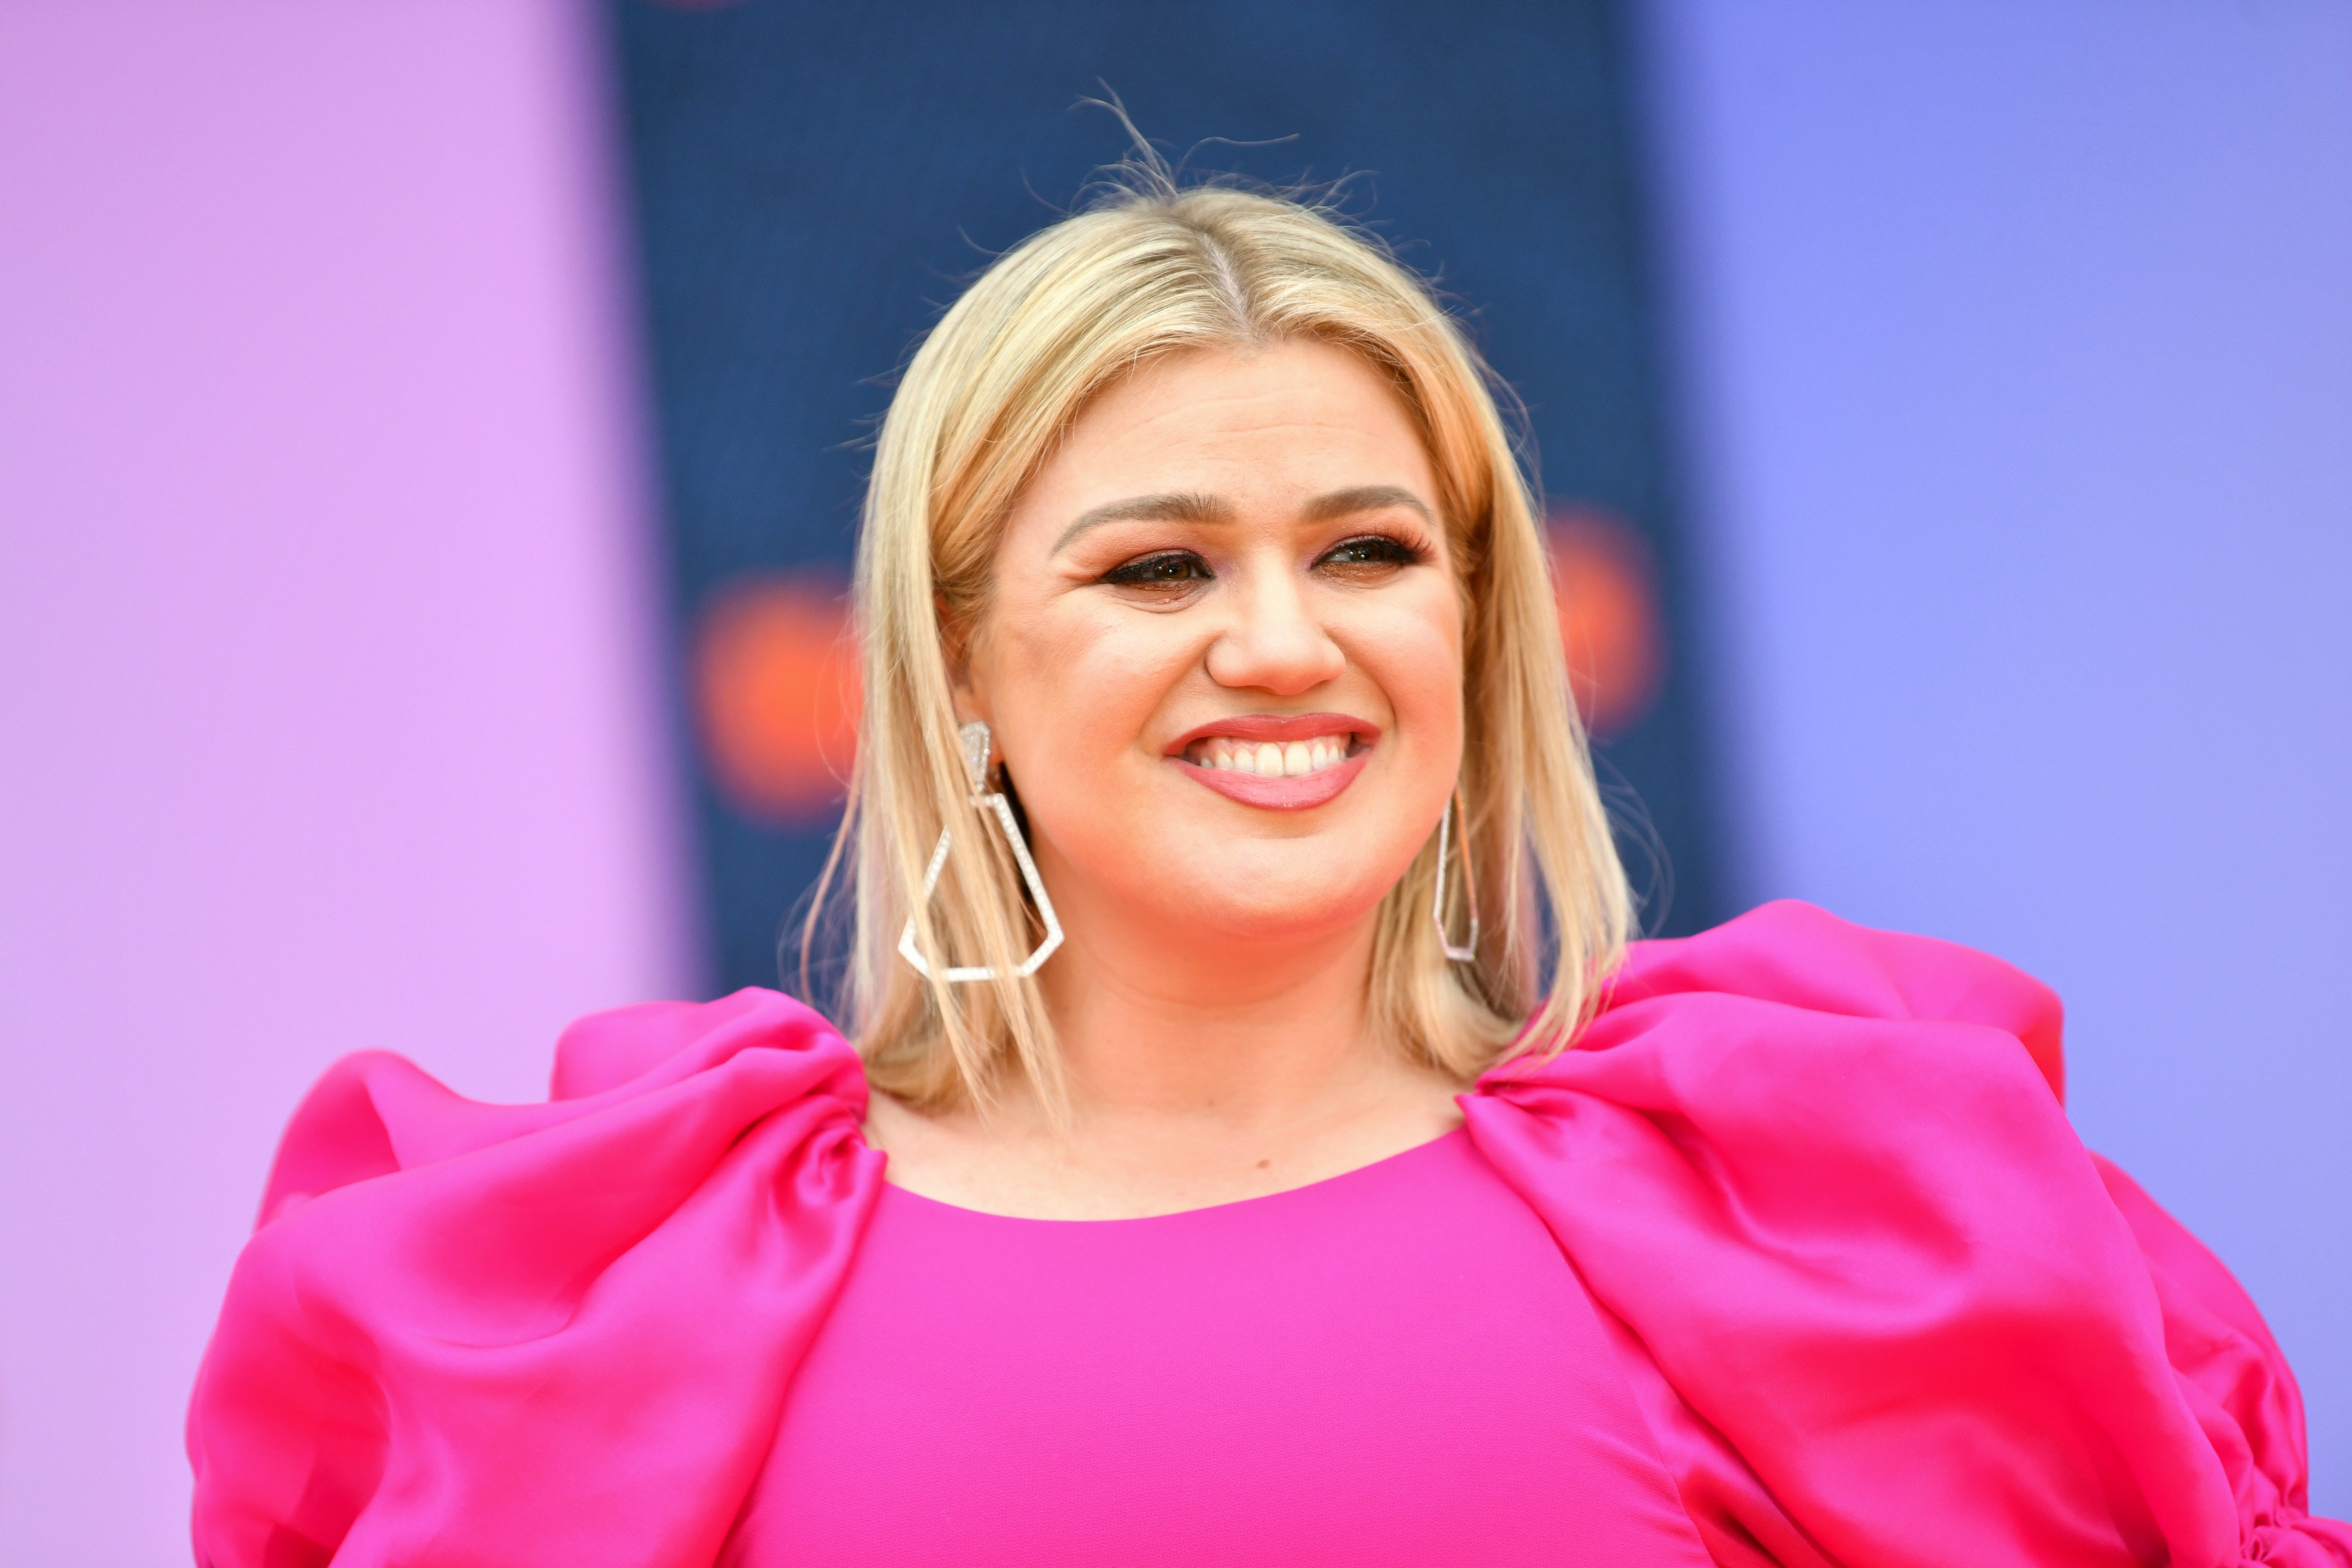 Kelly Clarkson attends STX Films World Premiere of "UglyDolls" at Regal Cinemas L.A. Live on April 27, 2019. | Photo: GettyImages